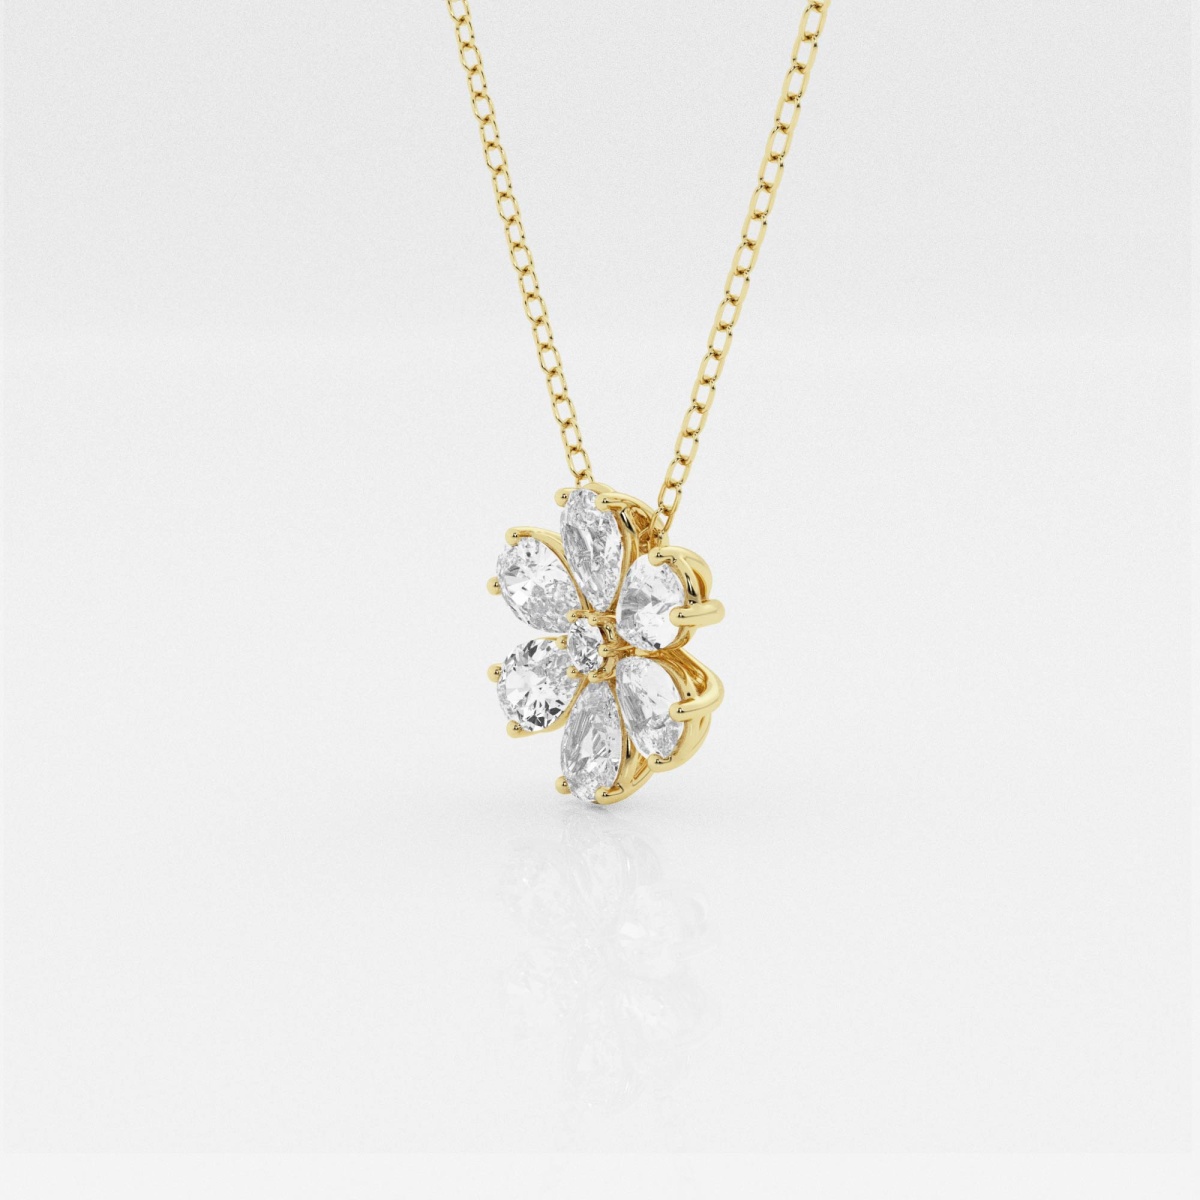 Additional Image 1 for  Badgley Mischka 7/8 ctw Pear and Round Lab Grown Diamond Flower Fashion Pendant with Adjustable Chain